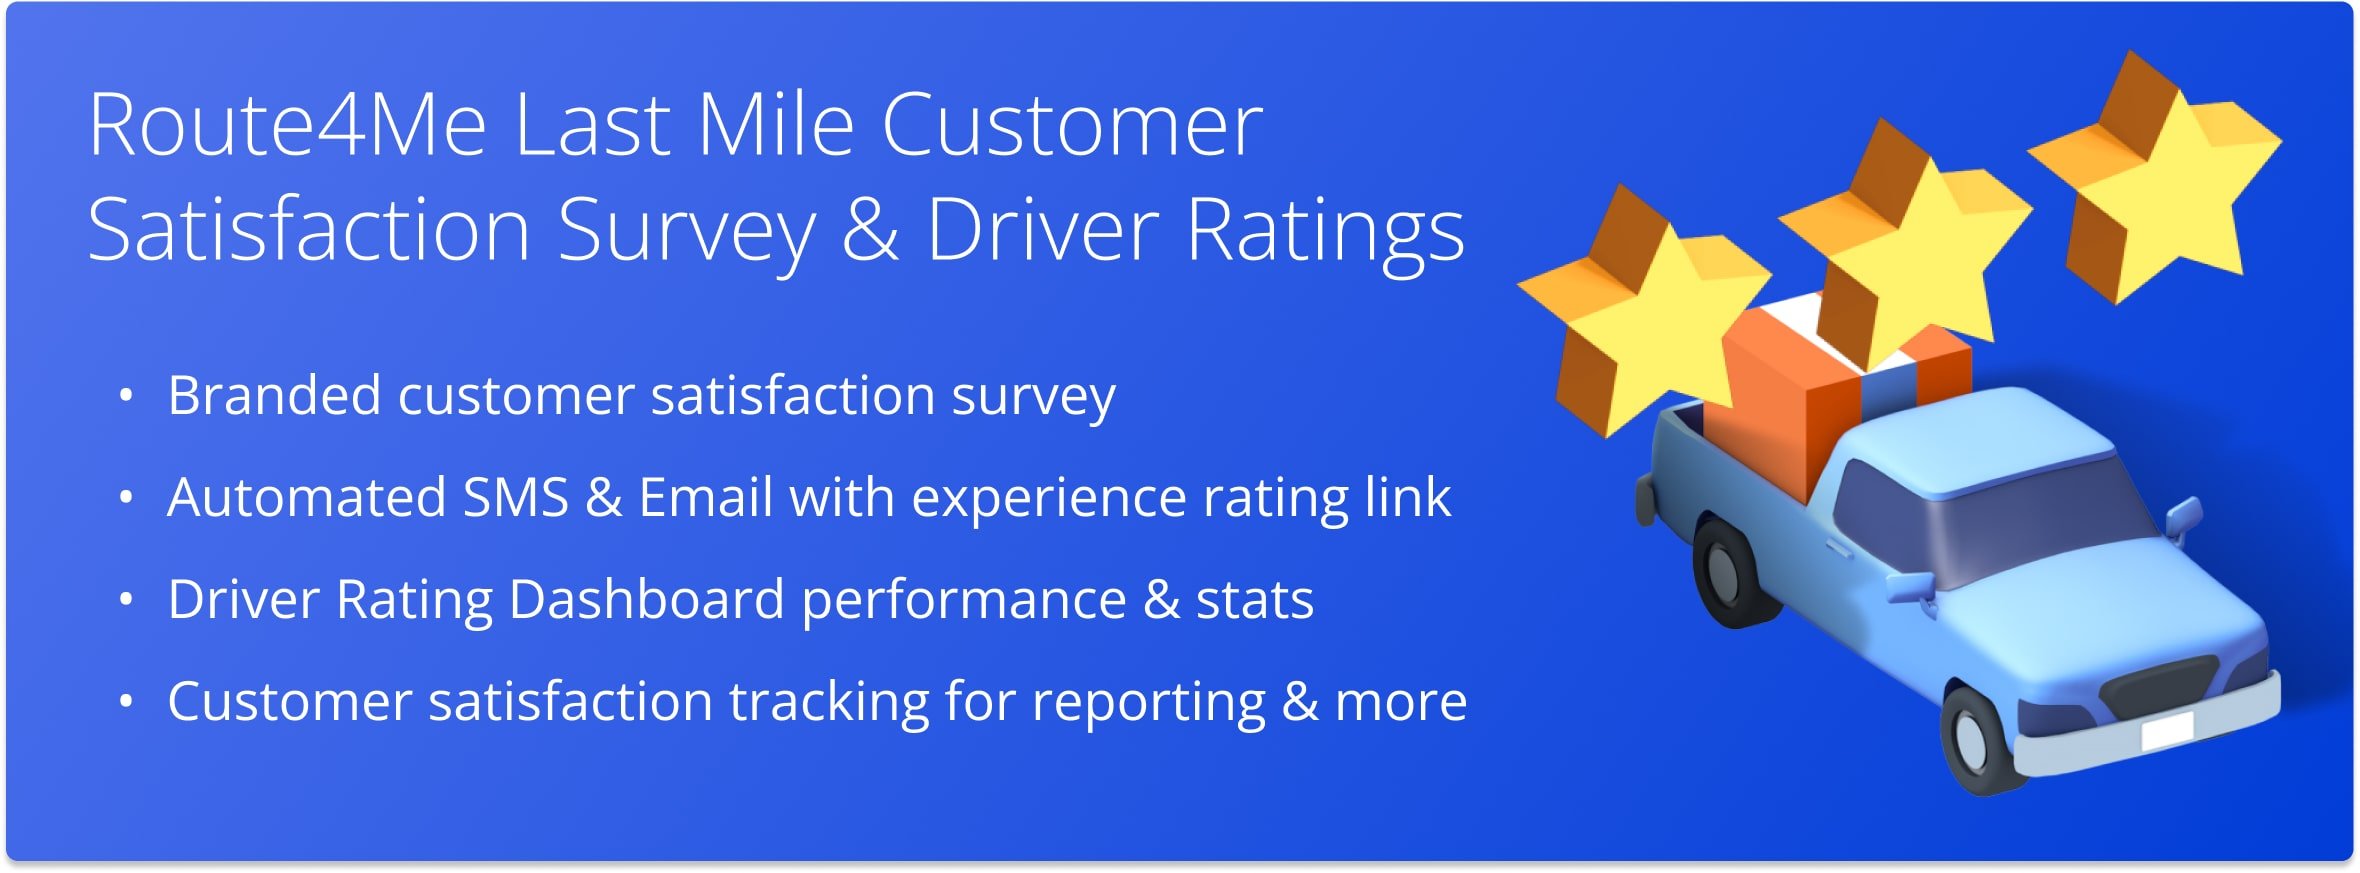 Send automated Driver Rating Survey to customers in your Email and SMS notifications, view driver rating history dashboard, customize and brand your customer satisfaction survey.